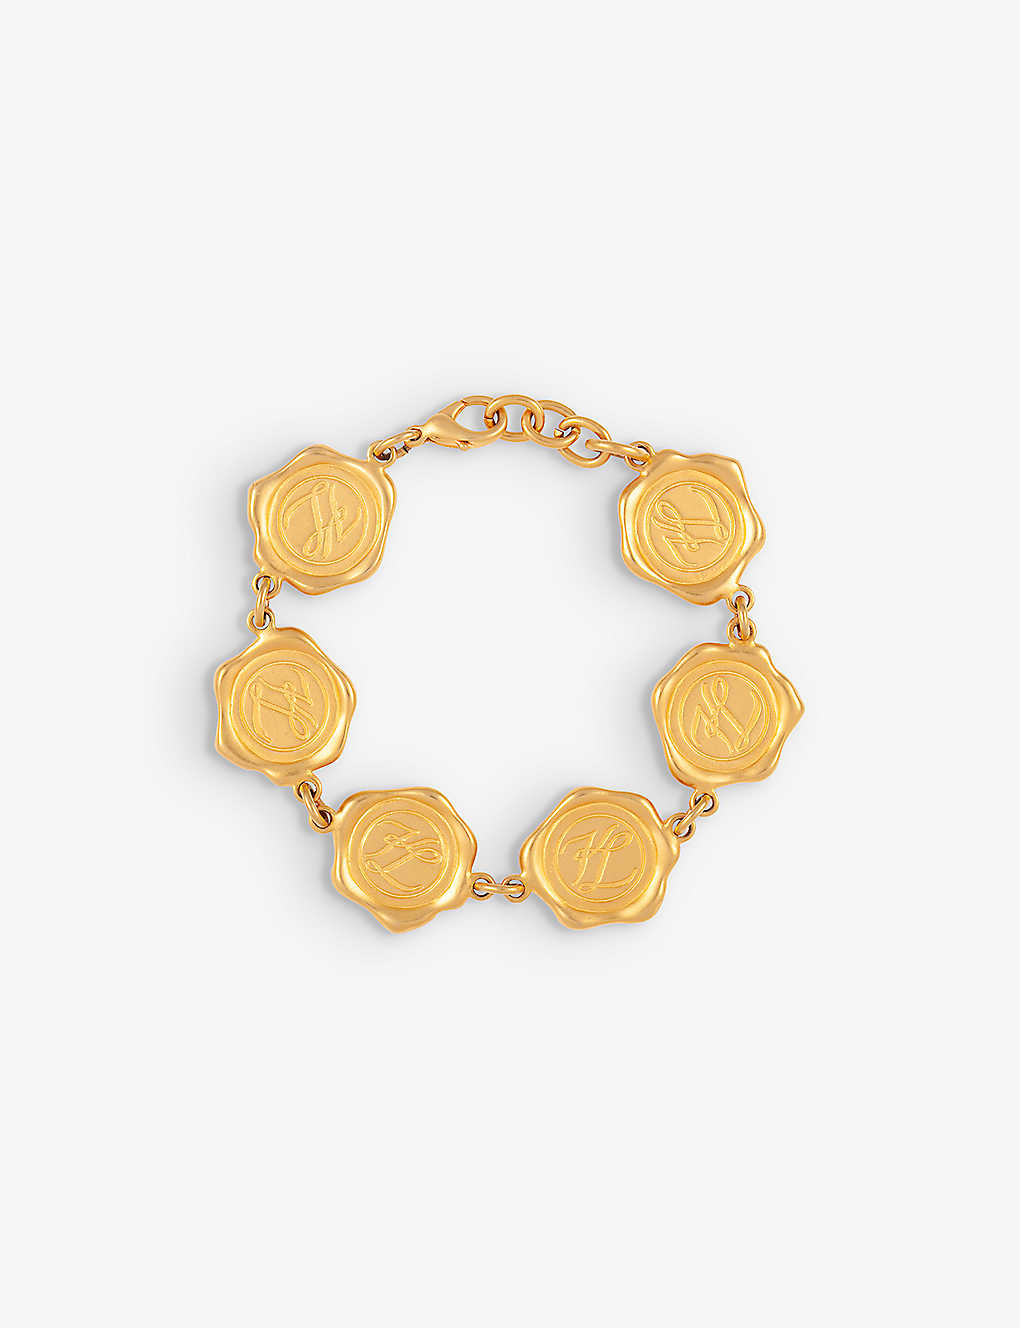 Susan Caplan Womens Gold Pre-loved Karl Lagerfeld 24ct Yellow Gold-plated Metal Medallion Bracelet